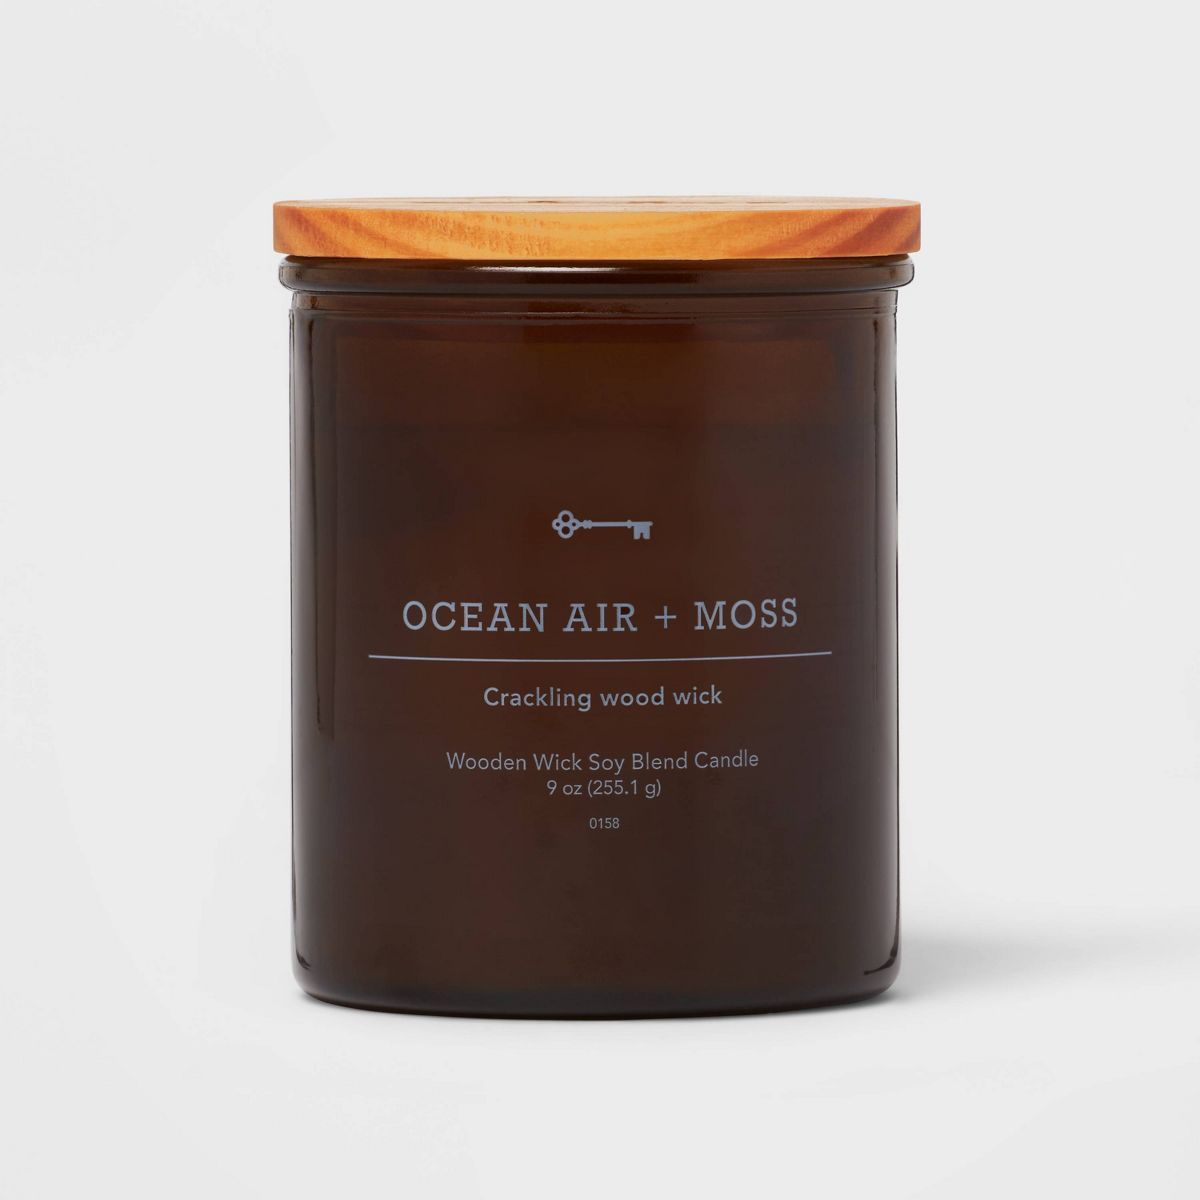 Amber Glass Ocean Air and Moss Lidded Wooden Wick Jar Candle 9oz - Threshold™ | Target